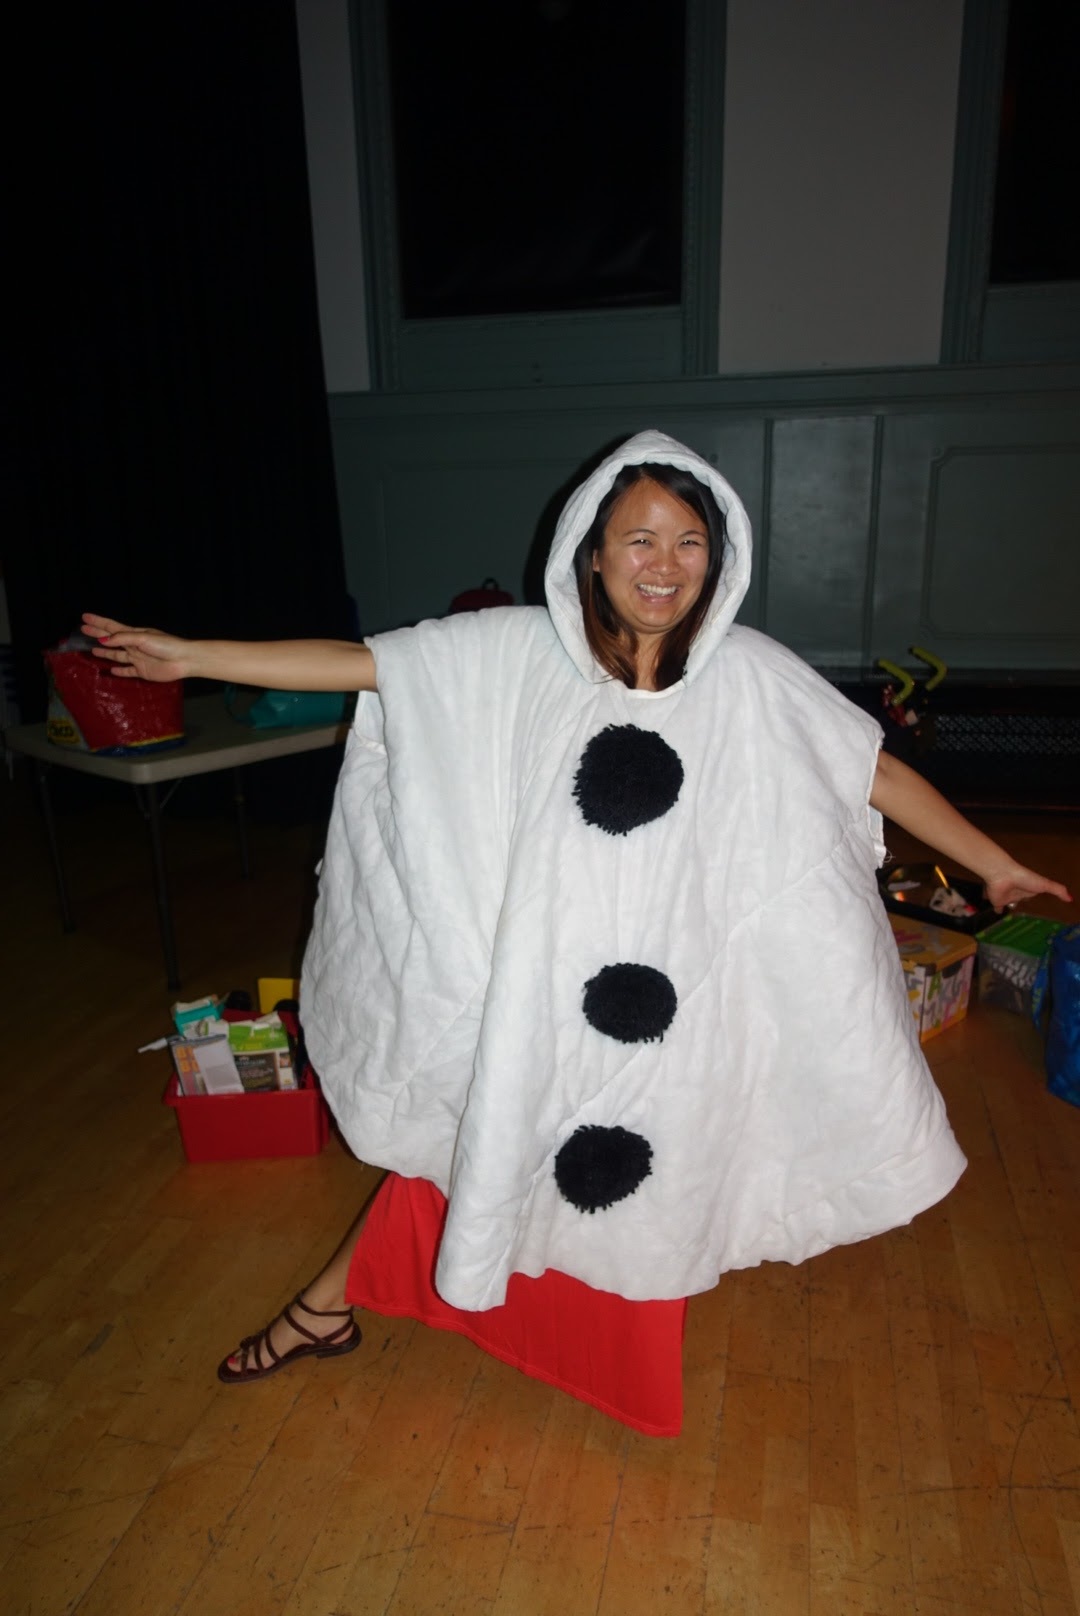 Diana, founder of Hampstead Mums, as Olaf